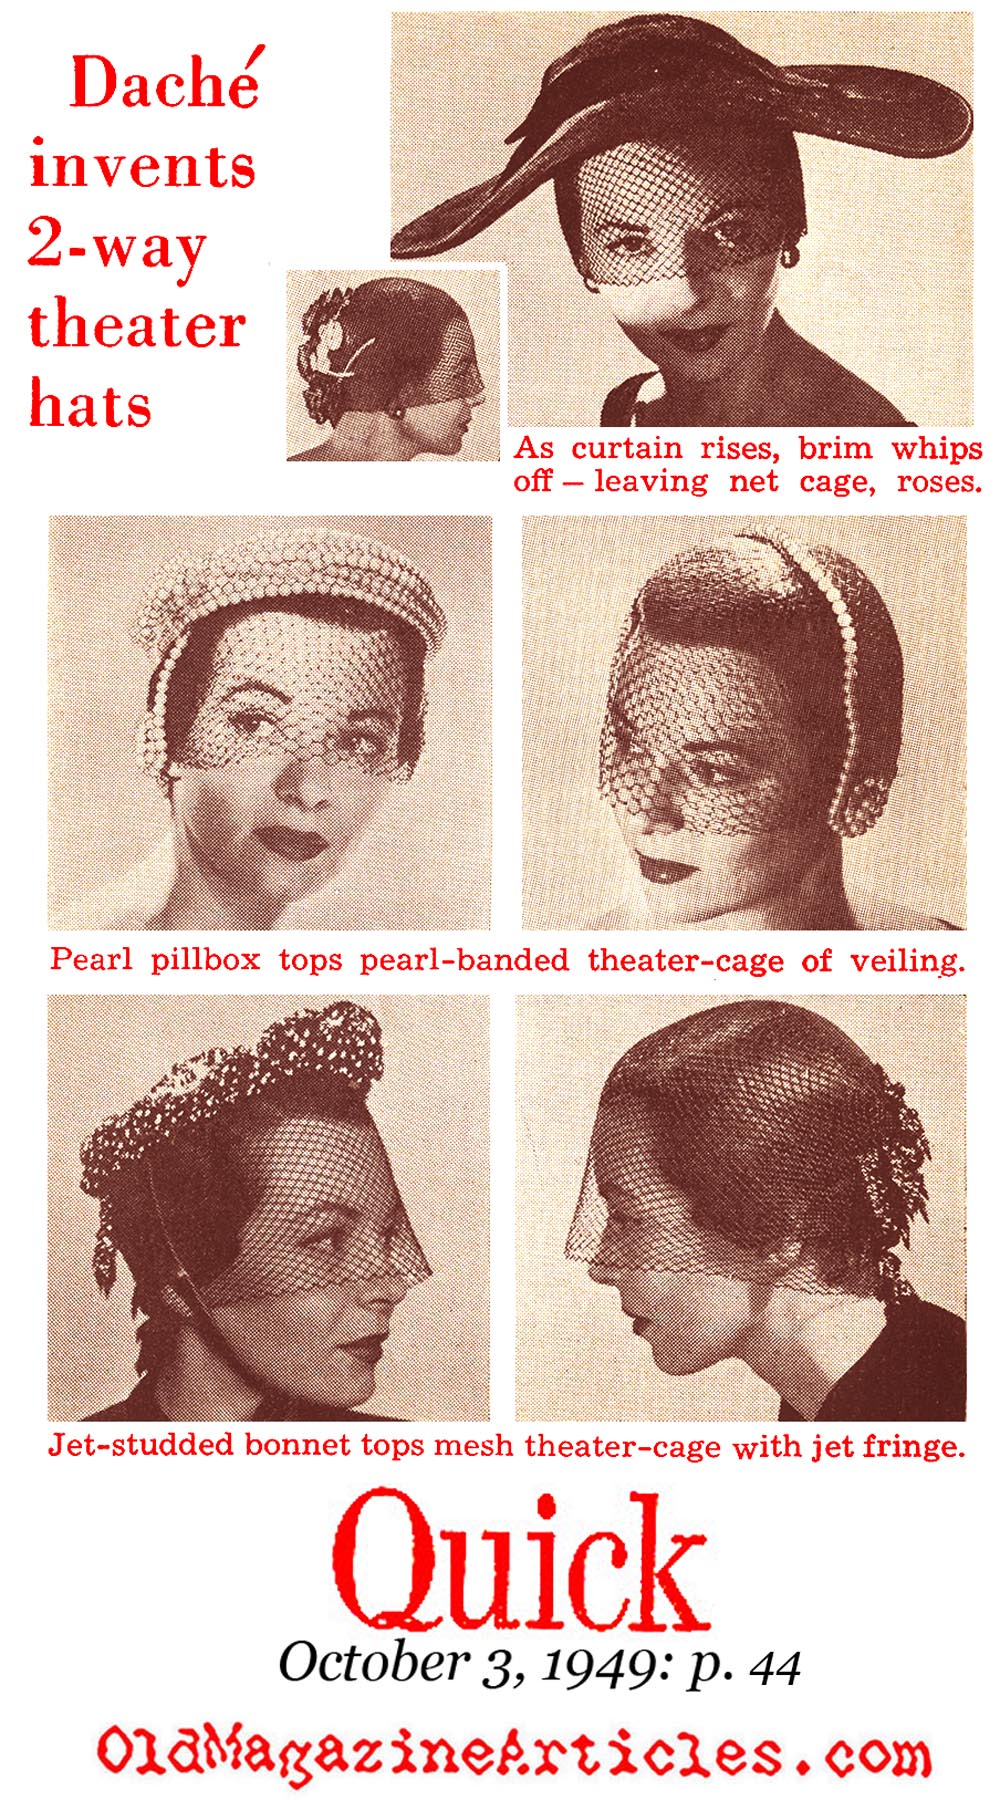 Theatre Hats by Lilly Dach (Quick Magazine, 1949)